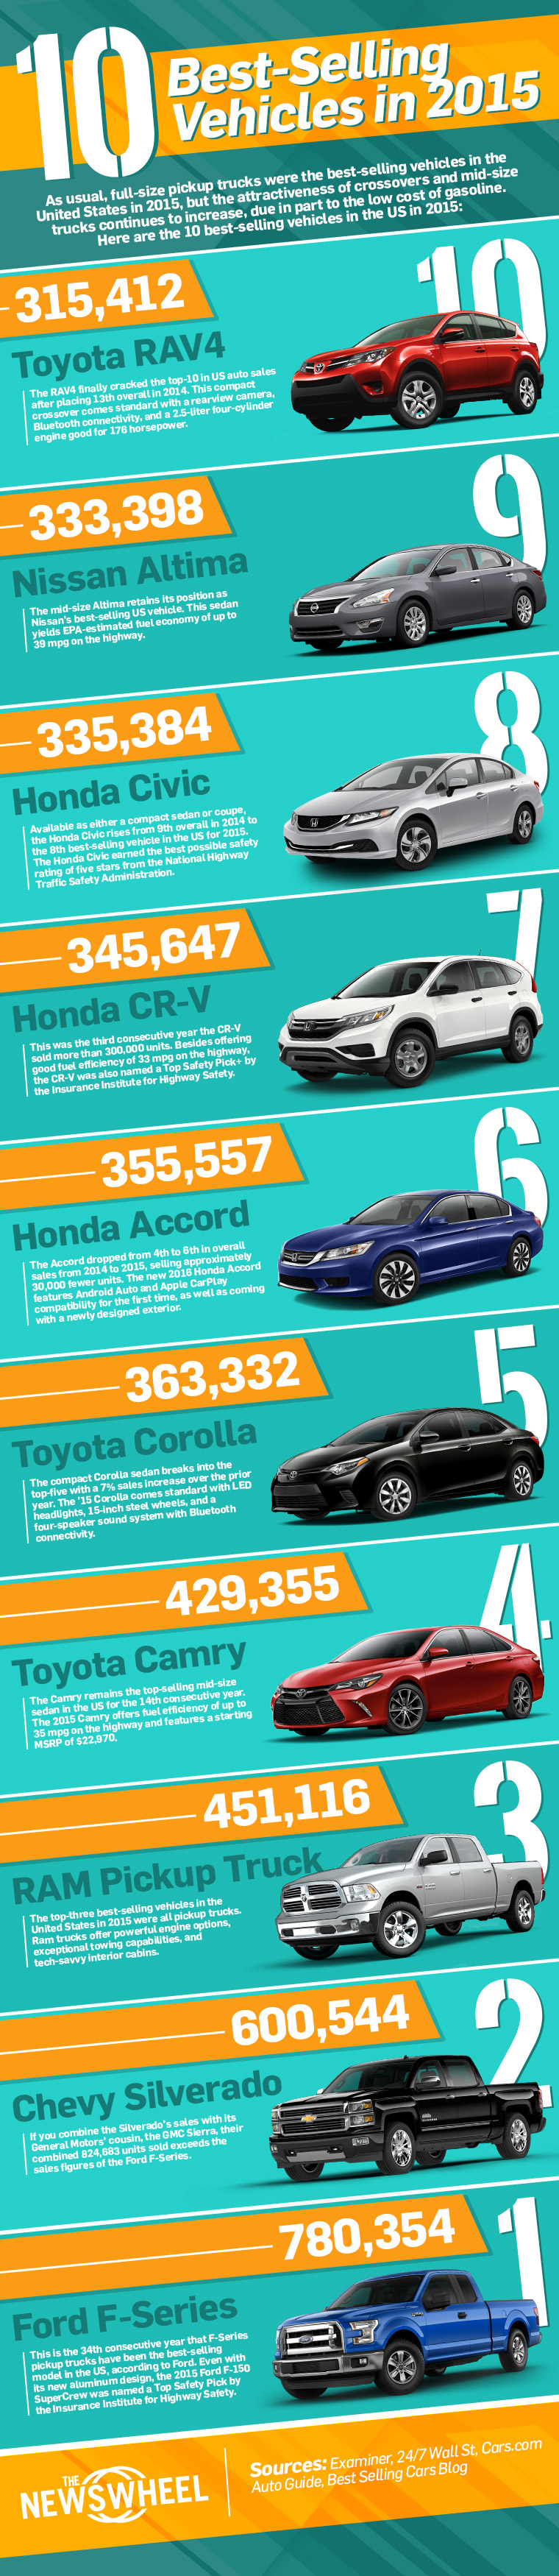 The 10 best selling automobiles in the US include the usual suspects and a few surprises